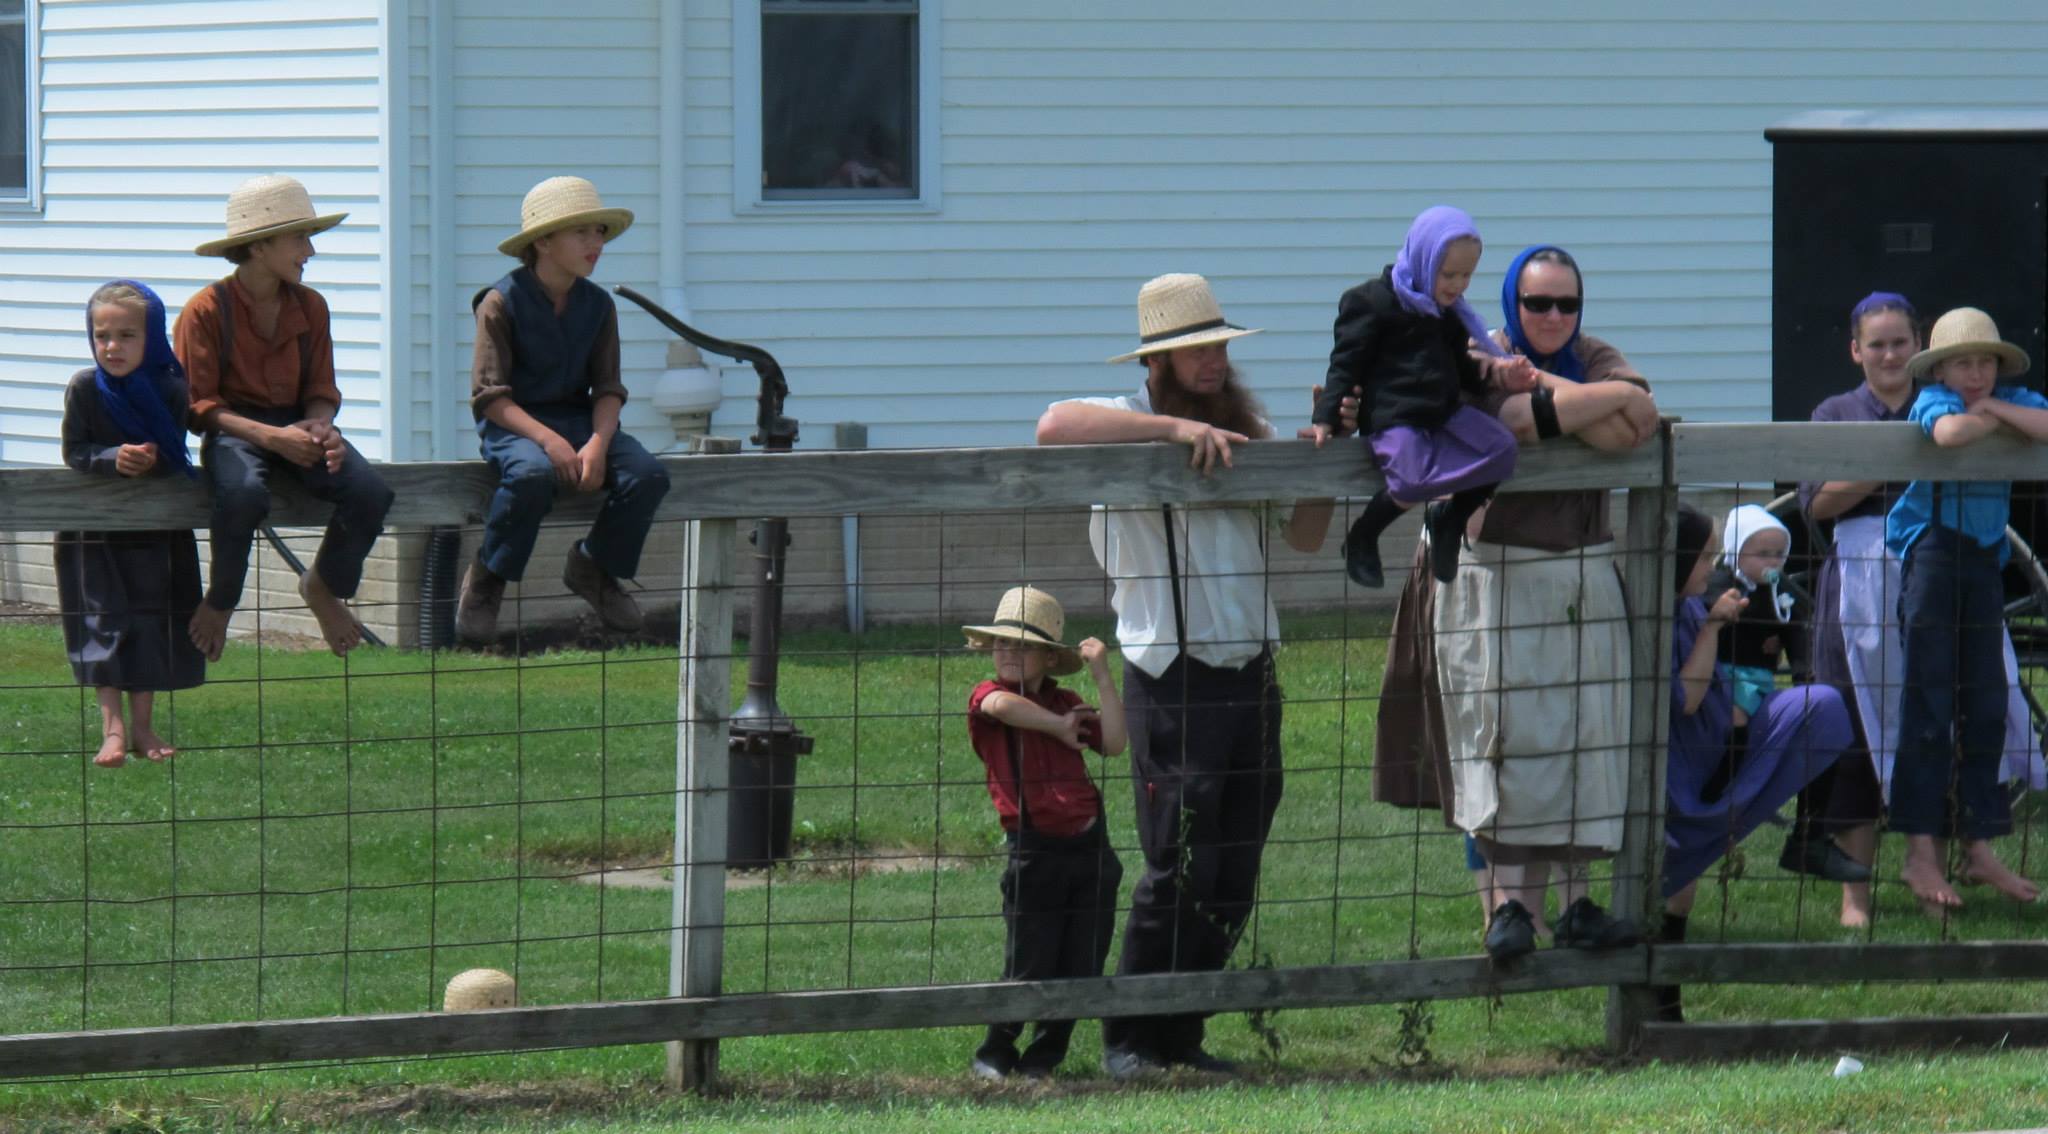 Amish at a country school observe RAGBRAI passing by.